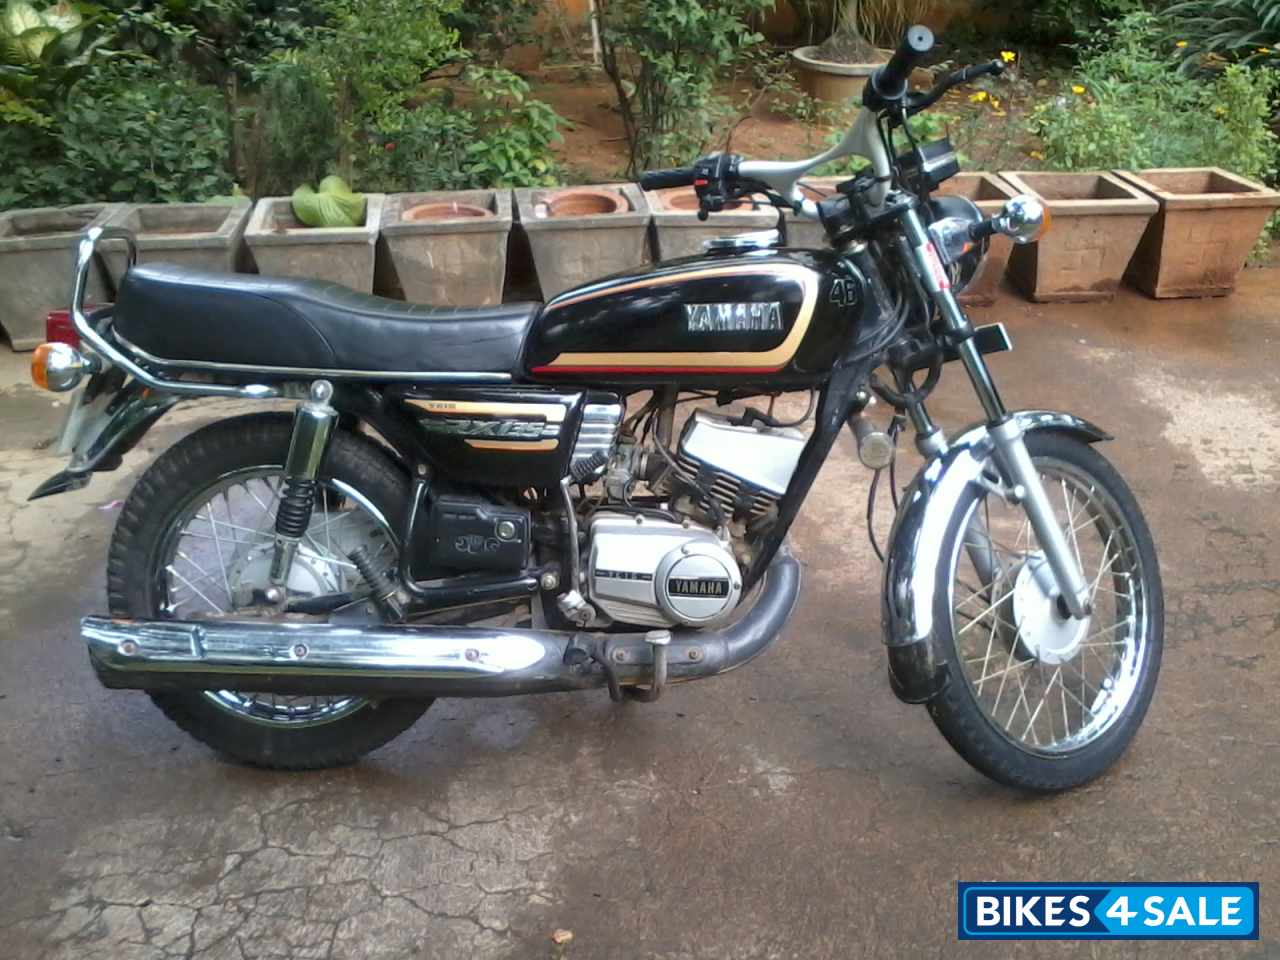 Second hand Yamaha RX 135 in Bangalore. Good condition ...